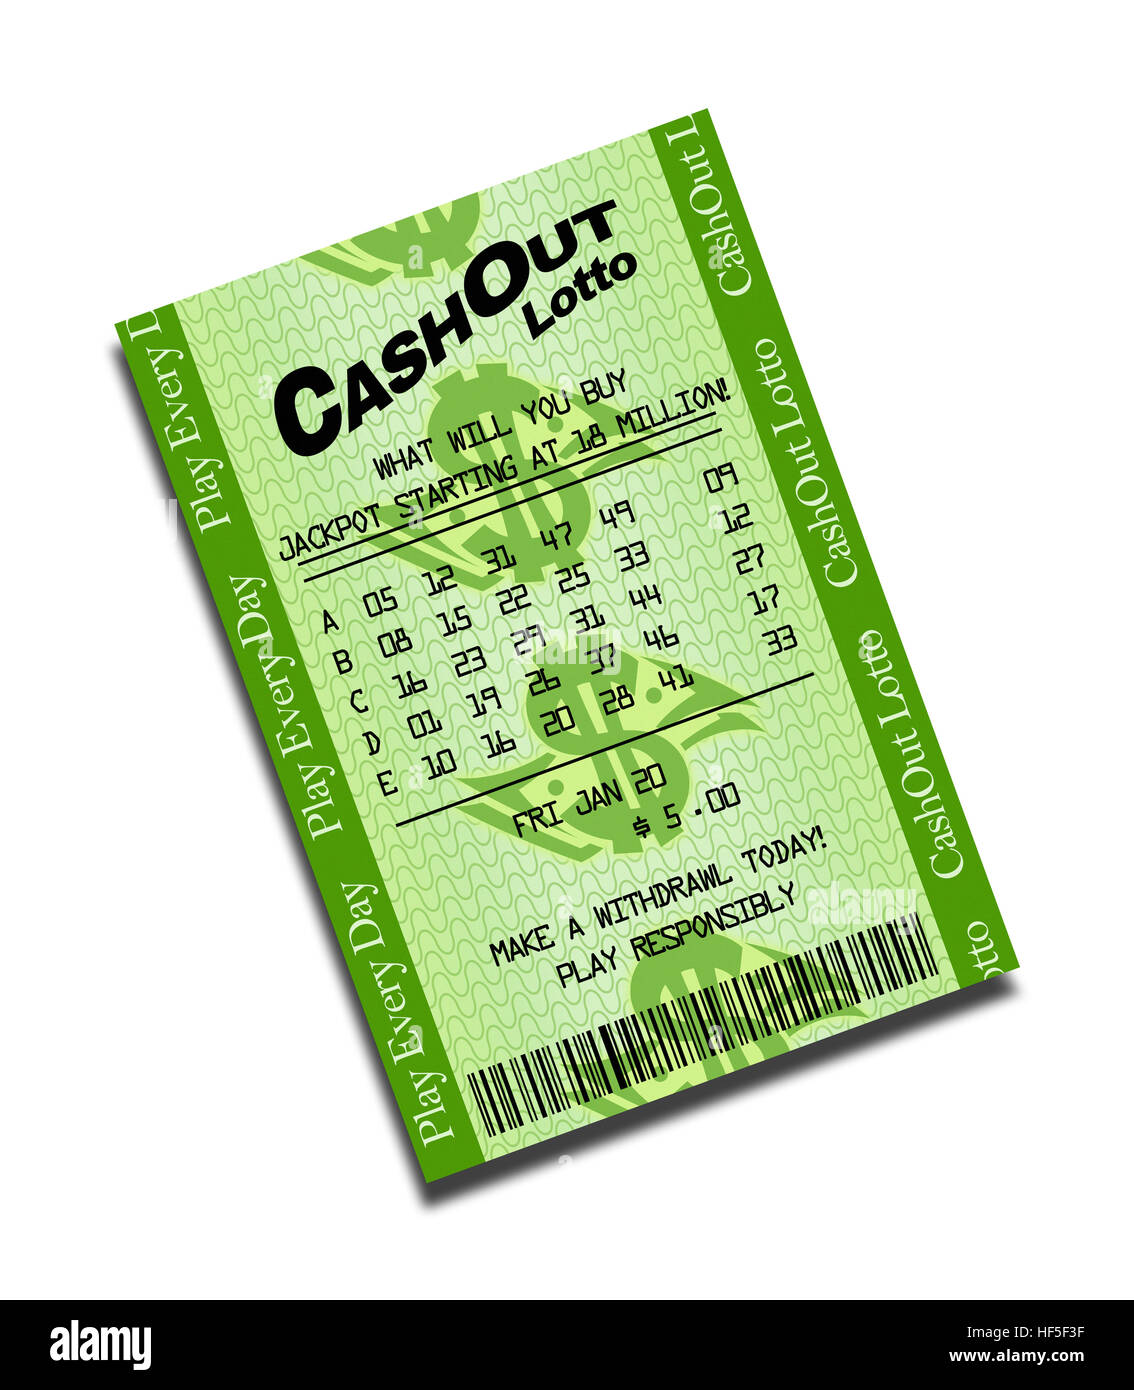 Cash Out Lotto Ticket with Numbers Isolated on White Background. Stock Photo